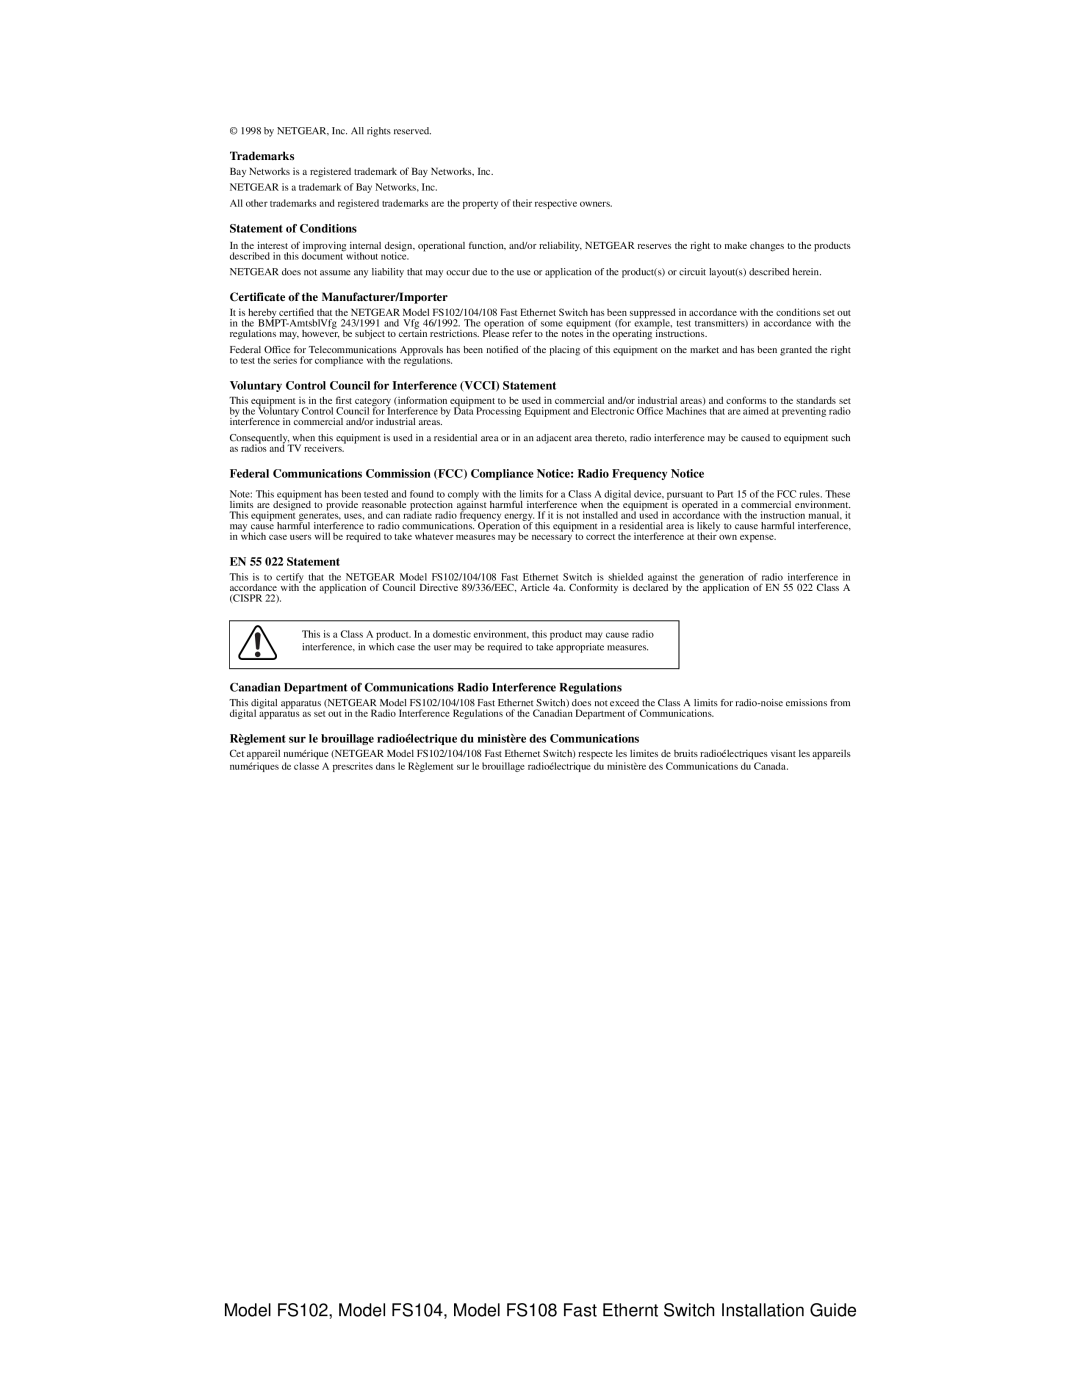 NETGEAR FS102 manual Trademarks, Statement of Conditions, Certificate of the Manufacturer/Importer, EN 55 022 Statement 